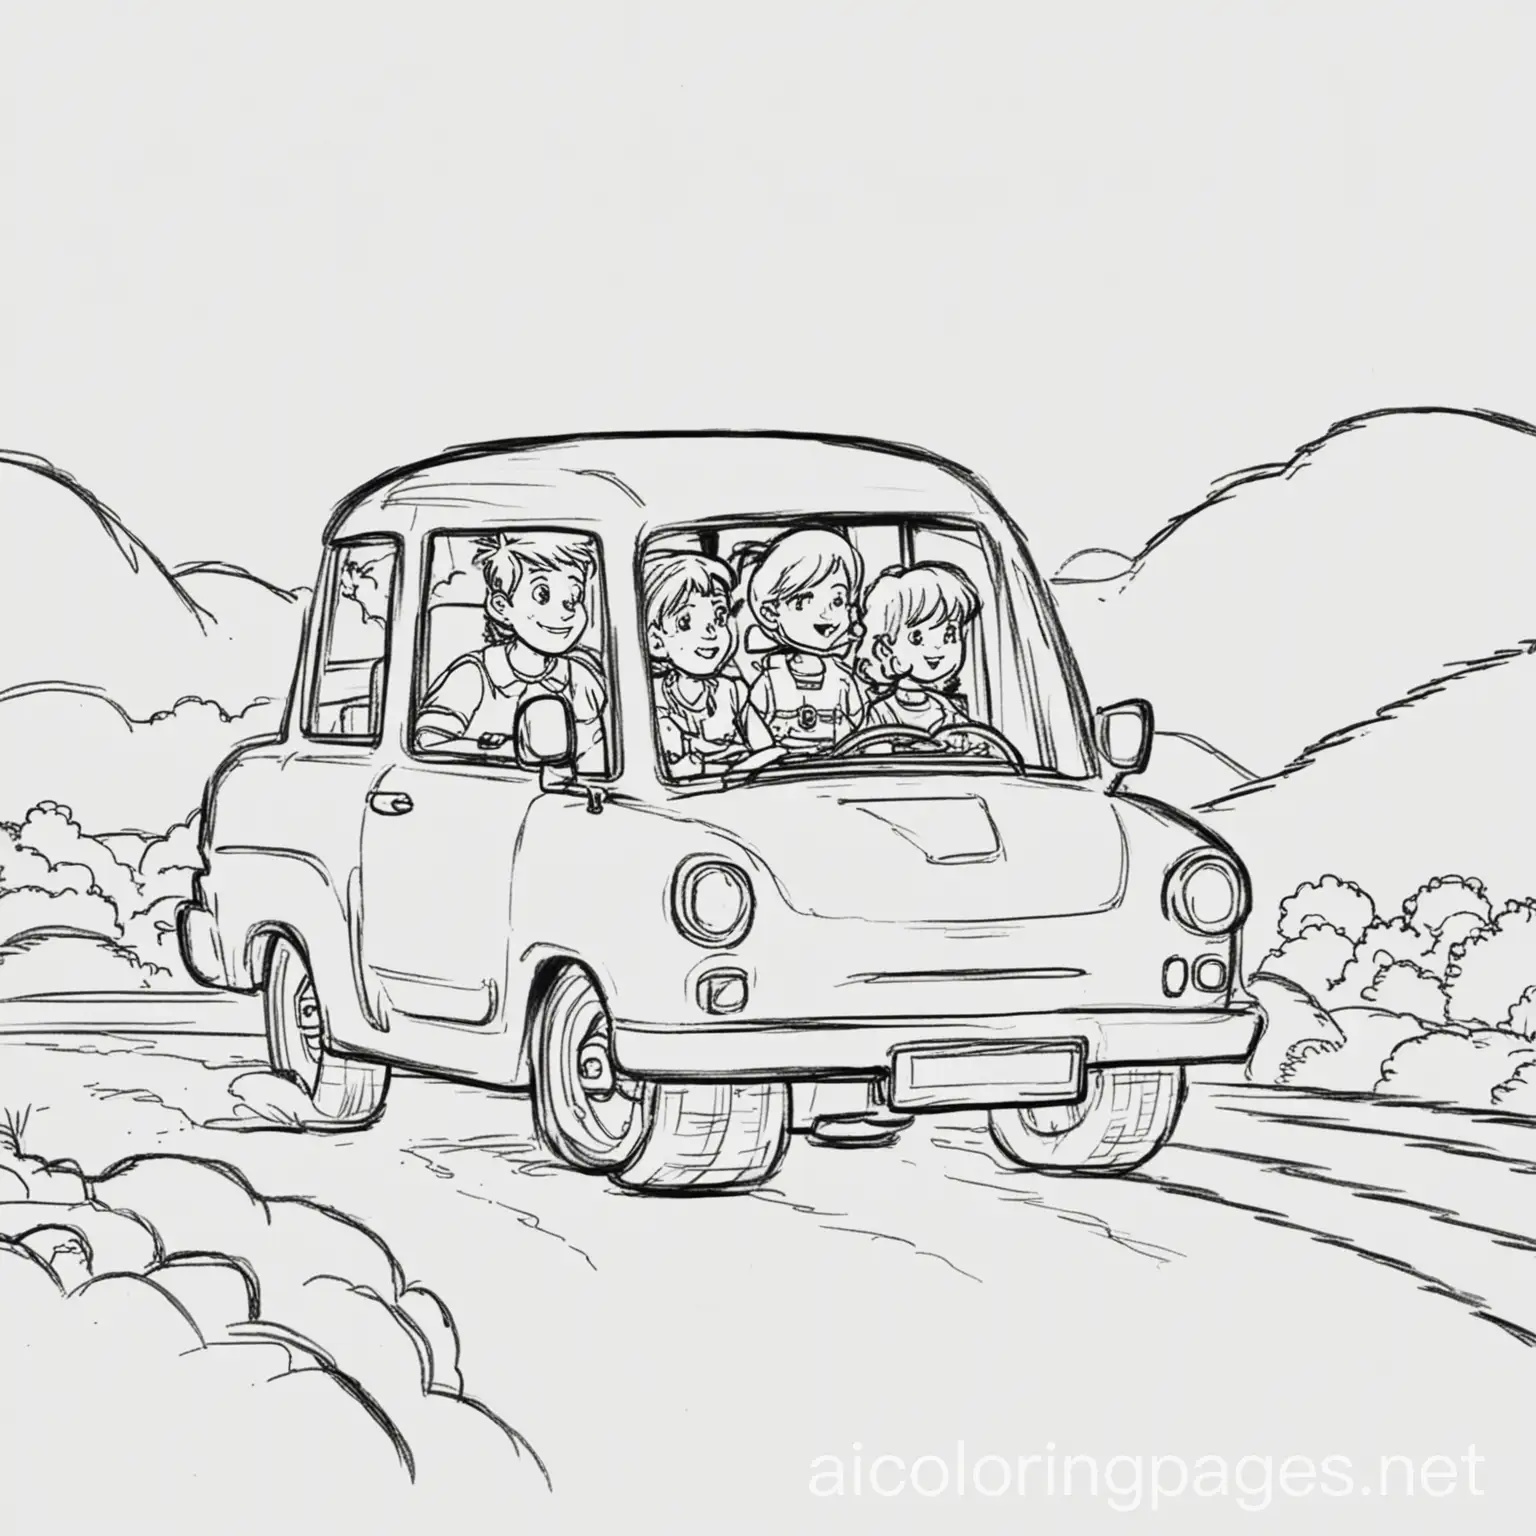 Family on a road trip in a car, Coloring Page, black and white, line art, white background, Simplicity, Ample White Space. The background of the coloring page is plain white to make it easy for young children to color within the lines. The outlines of all the subjects are easy to distinguish, making it simple for kids to color without too much difficulty